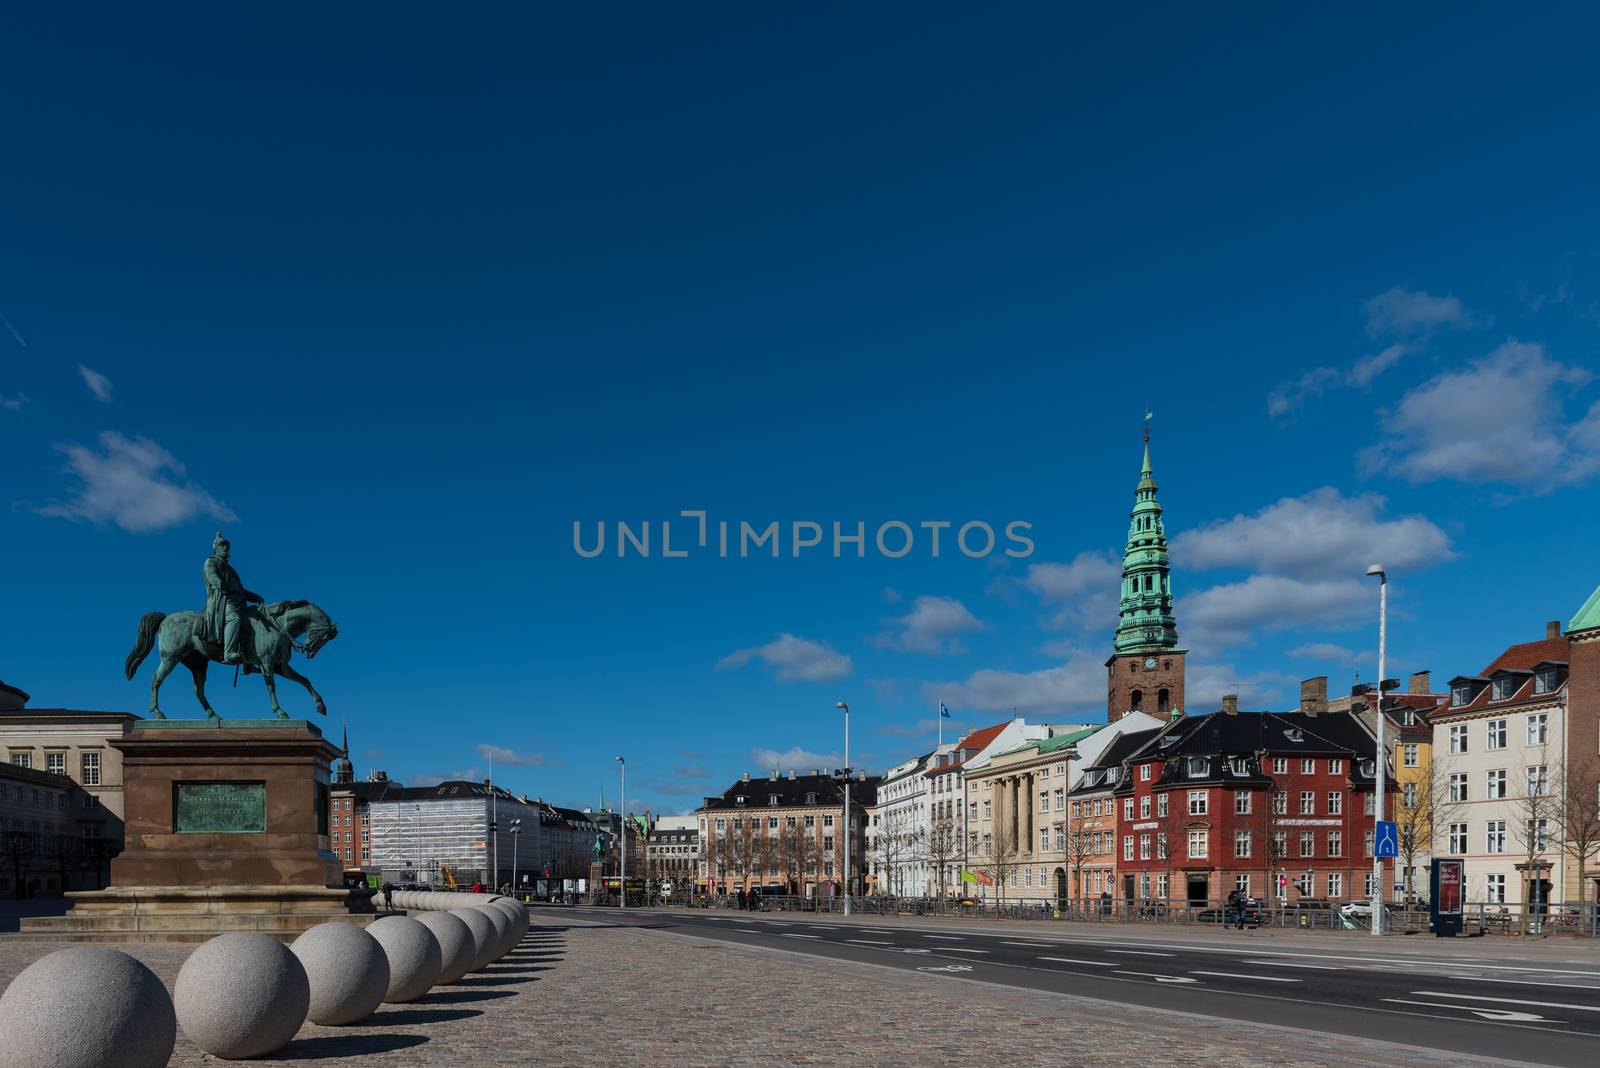 View from Christiansborg Slotsplads, on the left the statue of Frederick IV and on the right in the background the Nikolaj tower, Copenhagen Contemporary Art Center